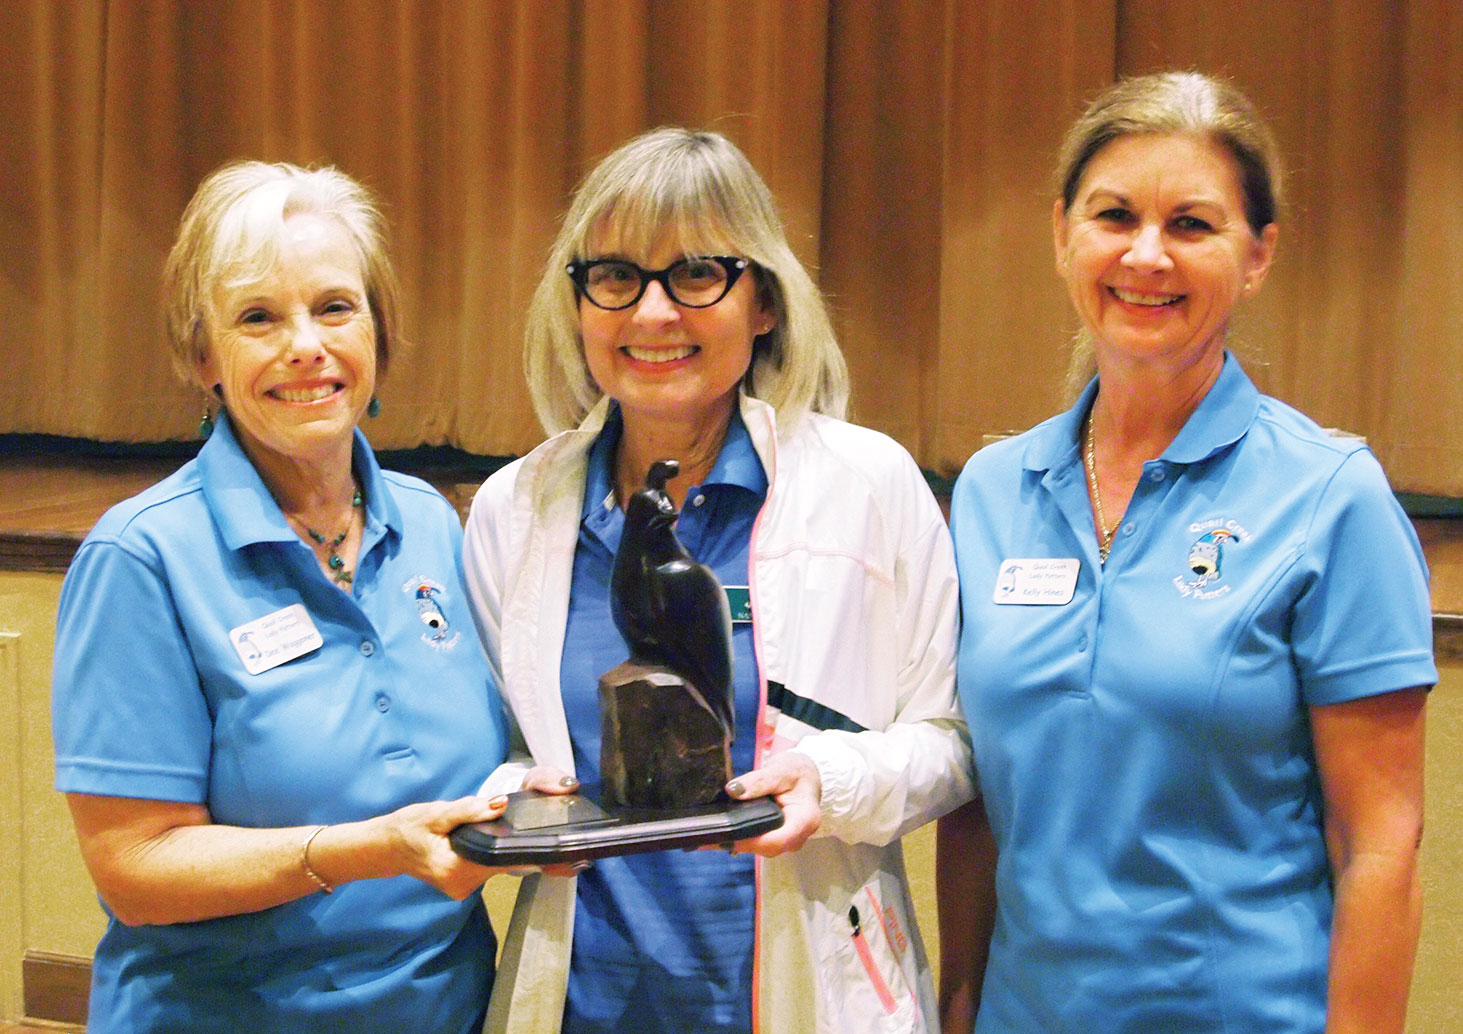 Left to right: Lou Moultrie is presented a plaque for achieving the lowest score from former Putters President Dee Waggoner and Kelly Hines, vice president; photo by Sylvia Butler.